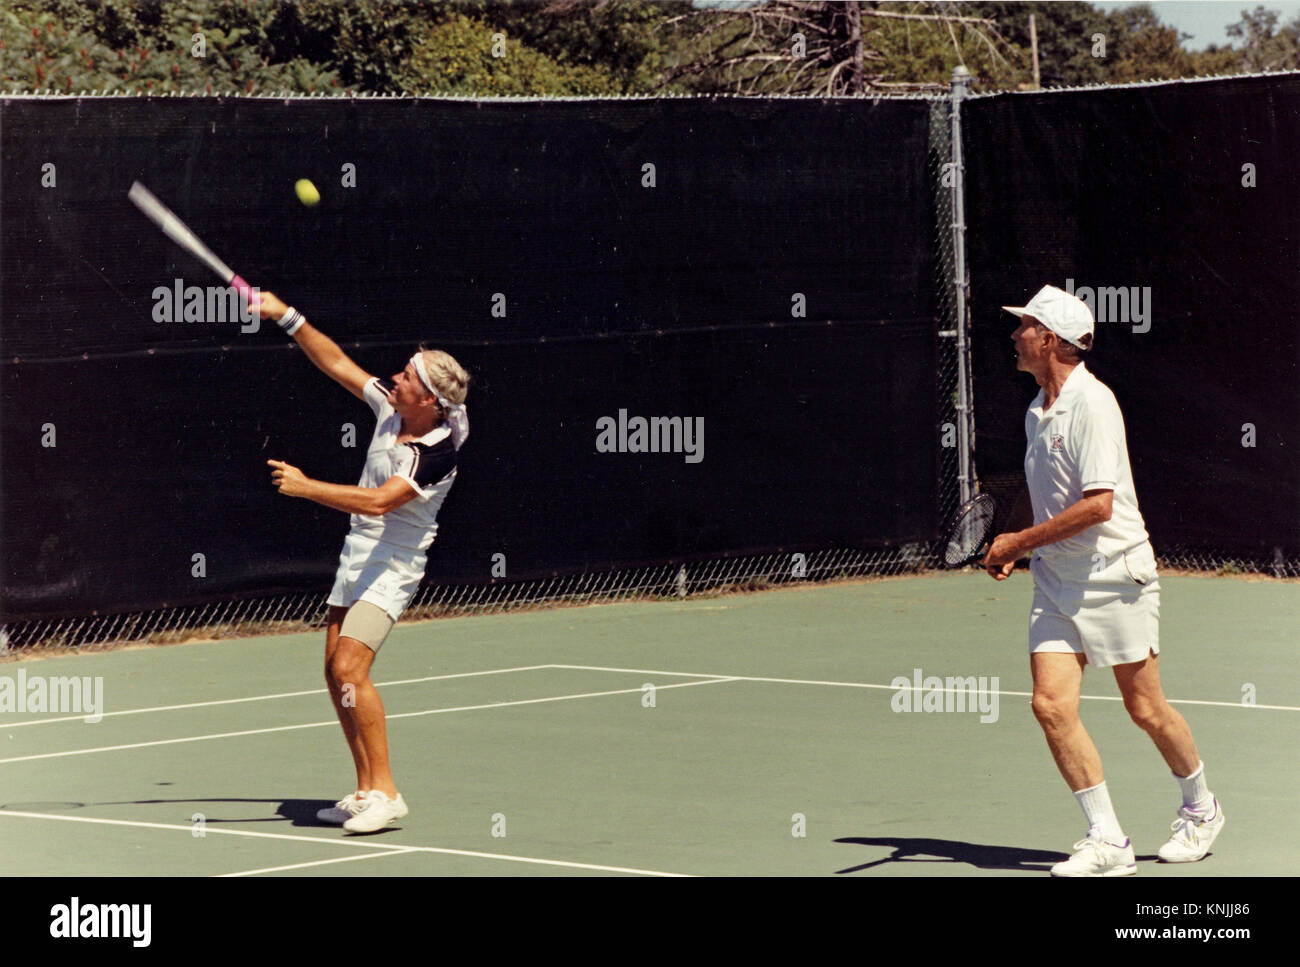 Kennebunkport, Maine, USA. 8th Aug, 1991. United States President George H.W. Bush, right, plays tennis at his summer vacation home in Kennebunkport, Maine on August 8, 1991.Mandatory Credit: David Valdez/White House via CNP Credit: David Valdez/CNP/ZUMA Wire/Alamy Live News Stock Photo